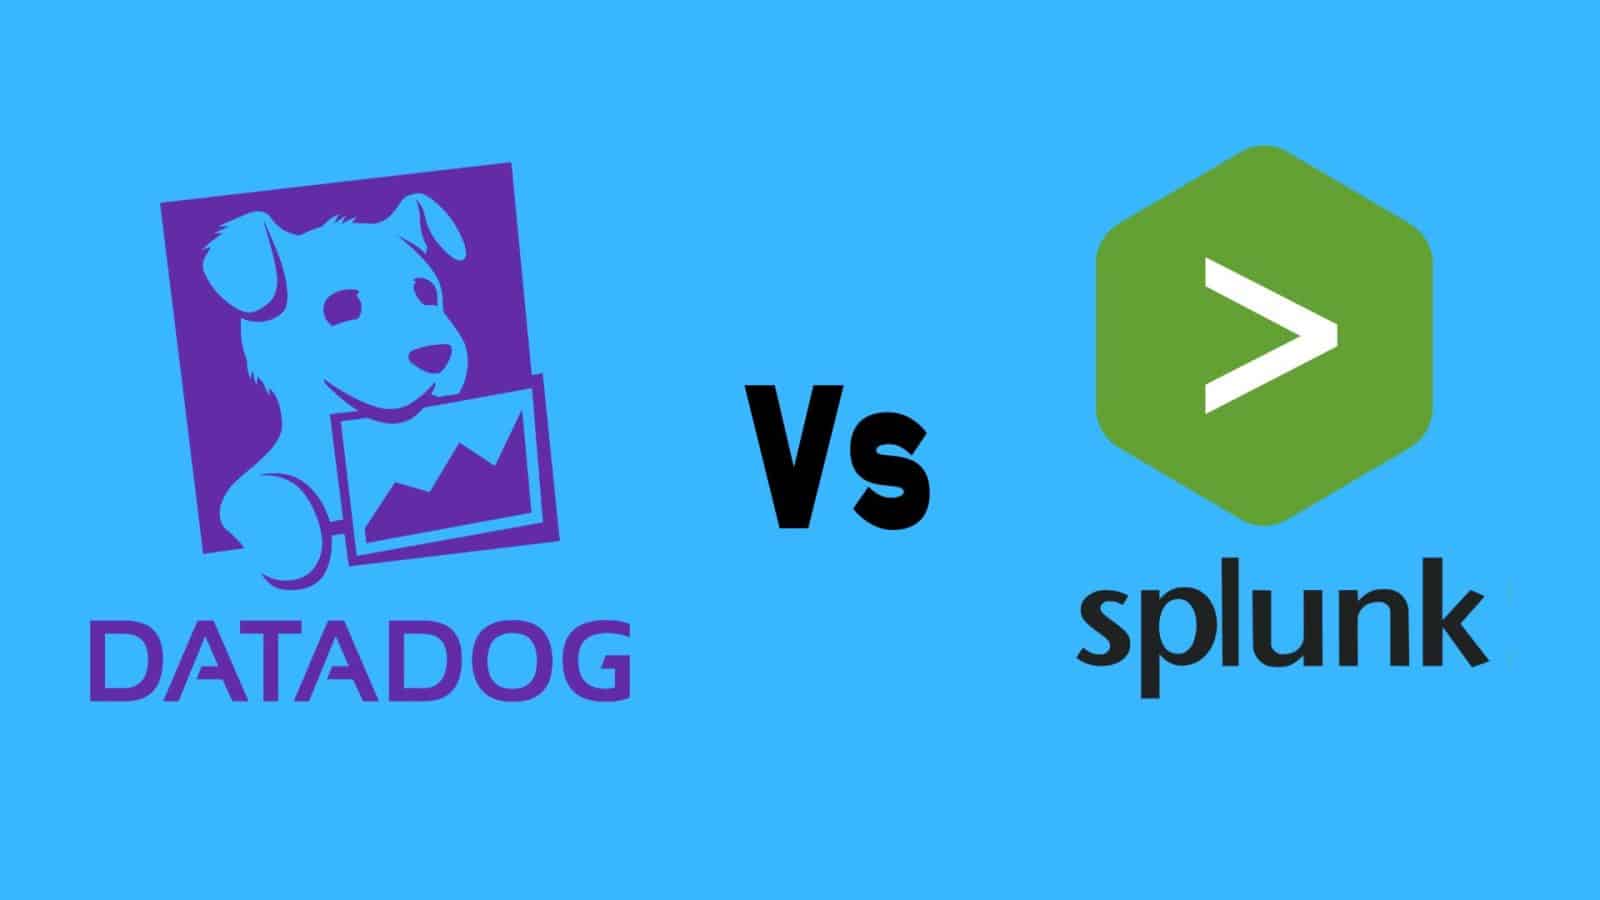 Datadog vs. Splunk - Which Is Better for Infrastructure Monitoring?